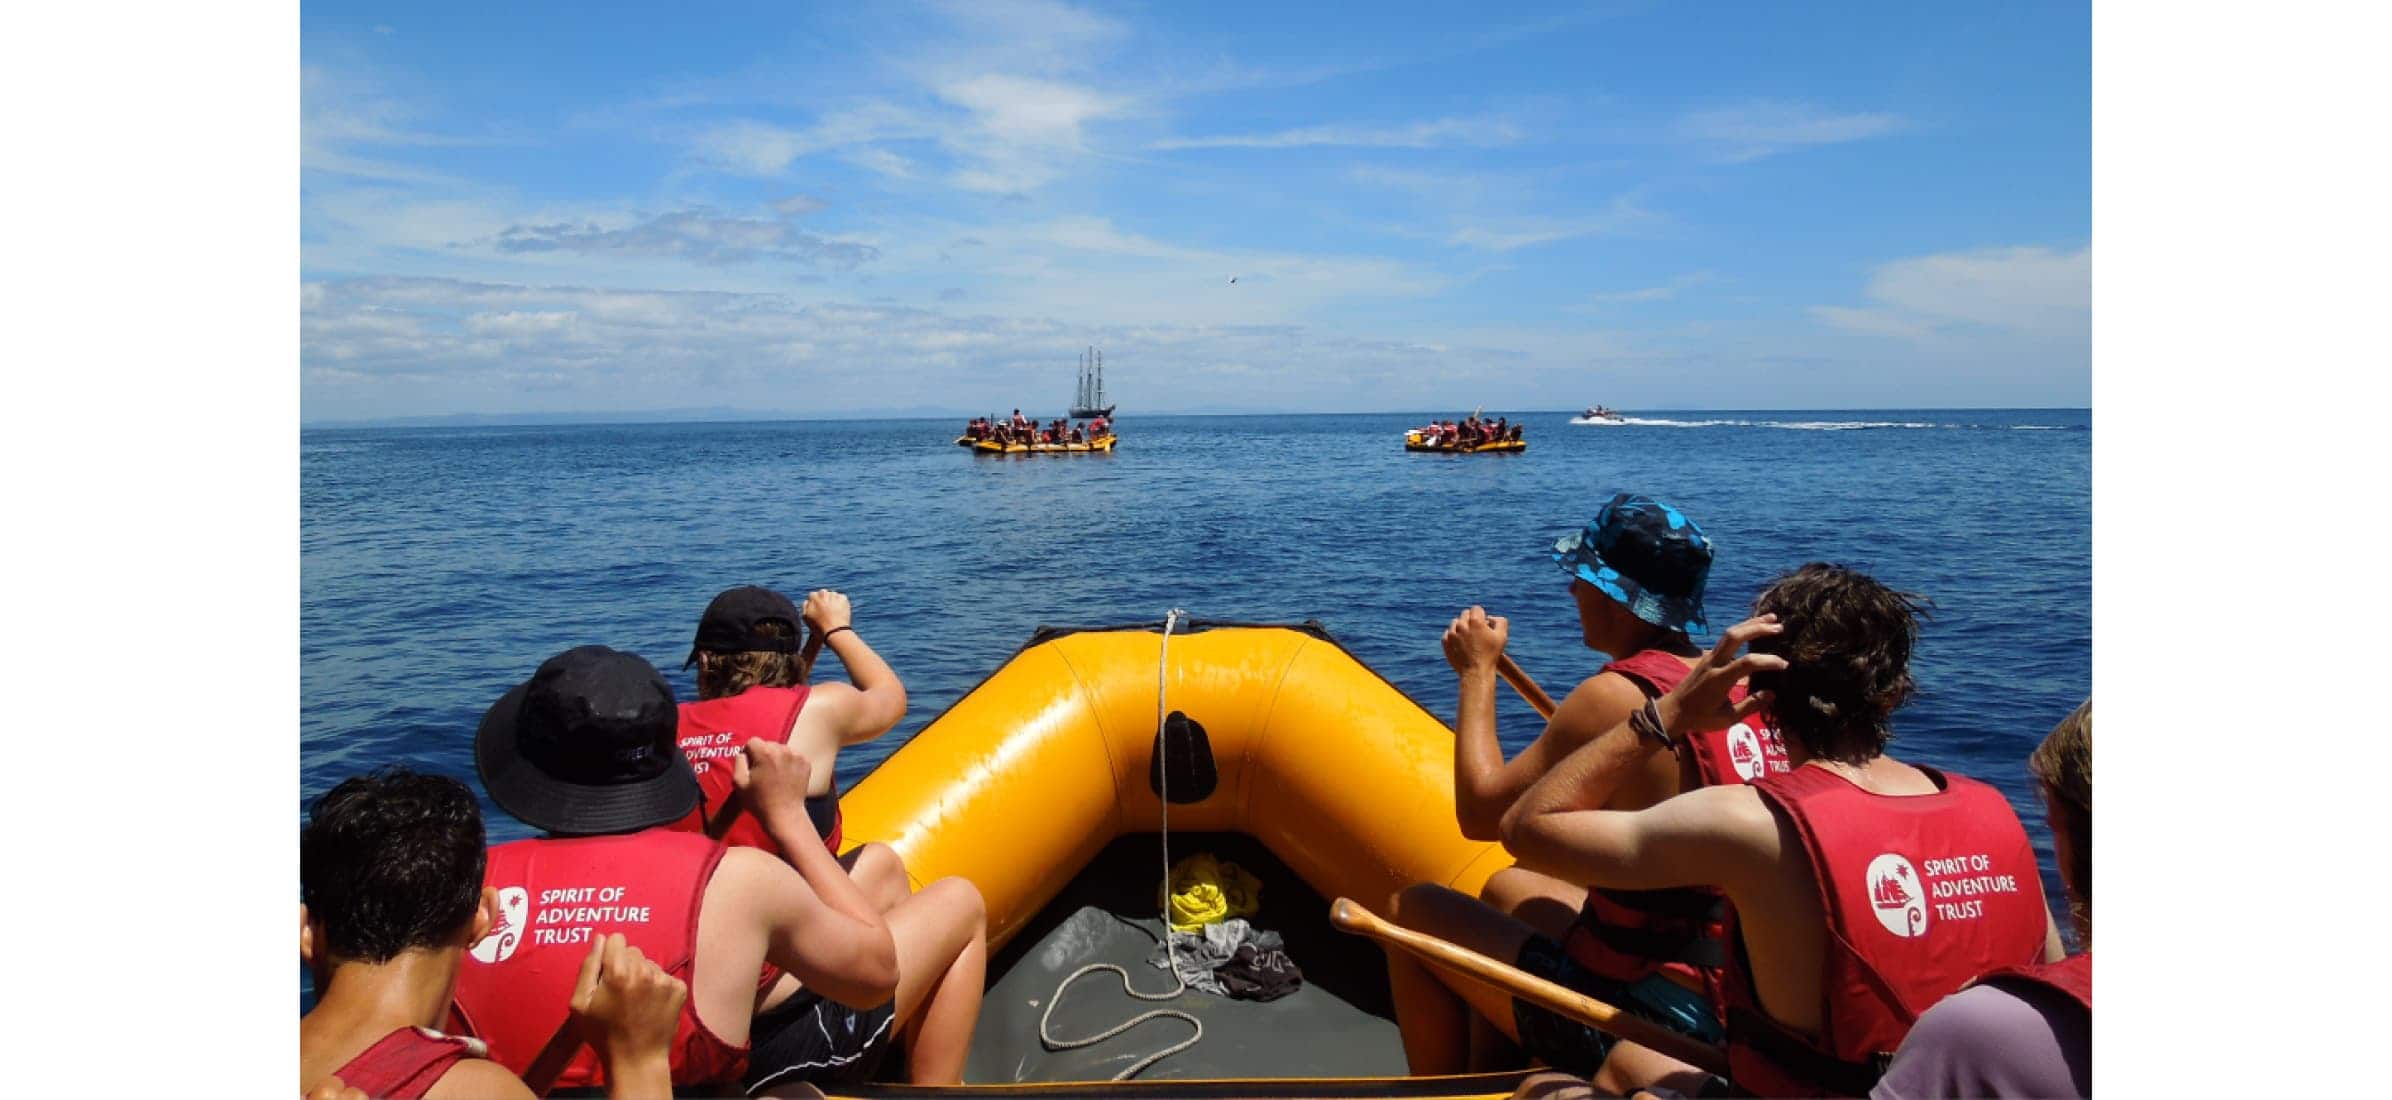 Passengers on an inflatable boat row towards two other boats, the Spirit of Adventure in the distance.